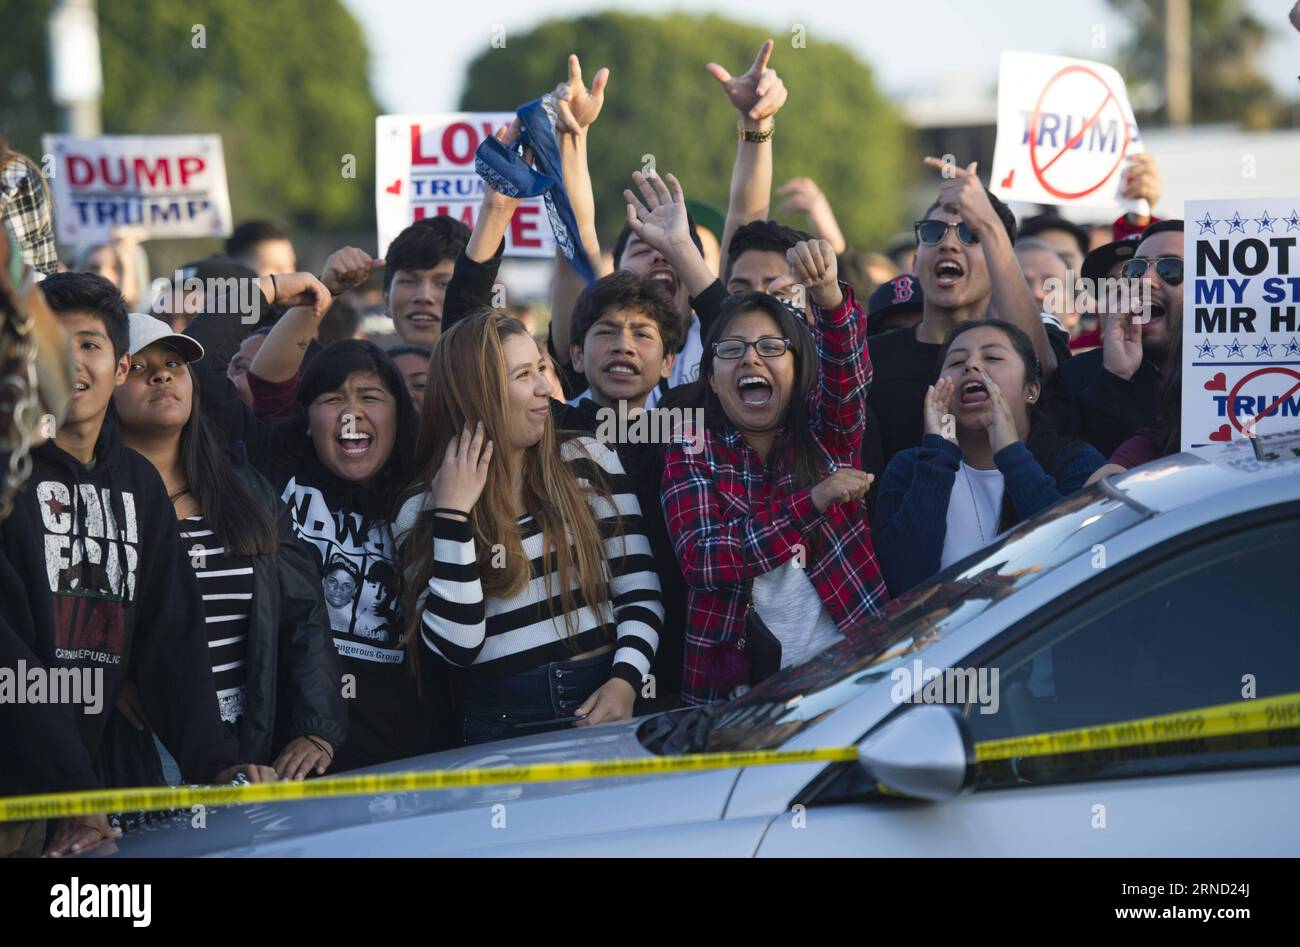 Protesters shout outside a Donald Trump campaign rally in Orange County, southern California, April 28, 2016. Supporters and opponents of the Republican presidential front-runner Donald J. Trump confronted for a few hours on Thursday to express their different opinions. ) US-ORANGE COUNTY-TRUMP-PROTEST yangxlei PUBLICATIONxNOTxINxCHN   protesters Shout outside a Donald Trump Campaign Rally in Orange County Southern California April 28 2016 Supporters and opponents of The Republican Presidential Front Runner Donald J Trump confronted for a few Hours ON Thursday to Shipping their different opini Stock Photo